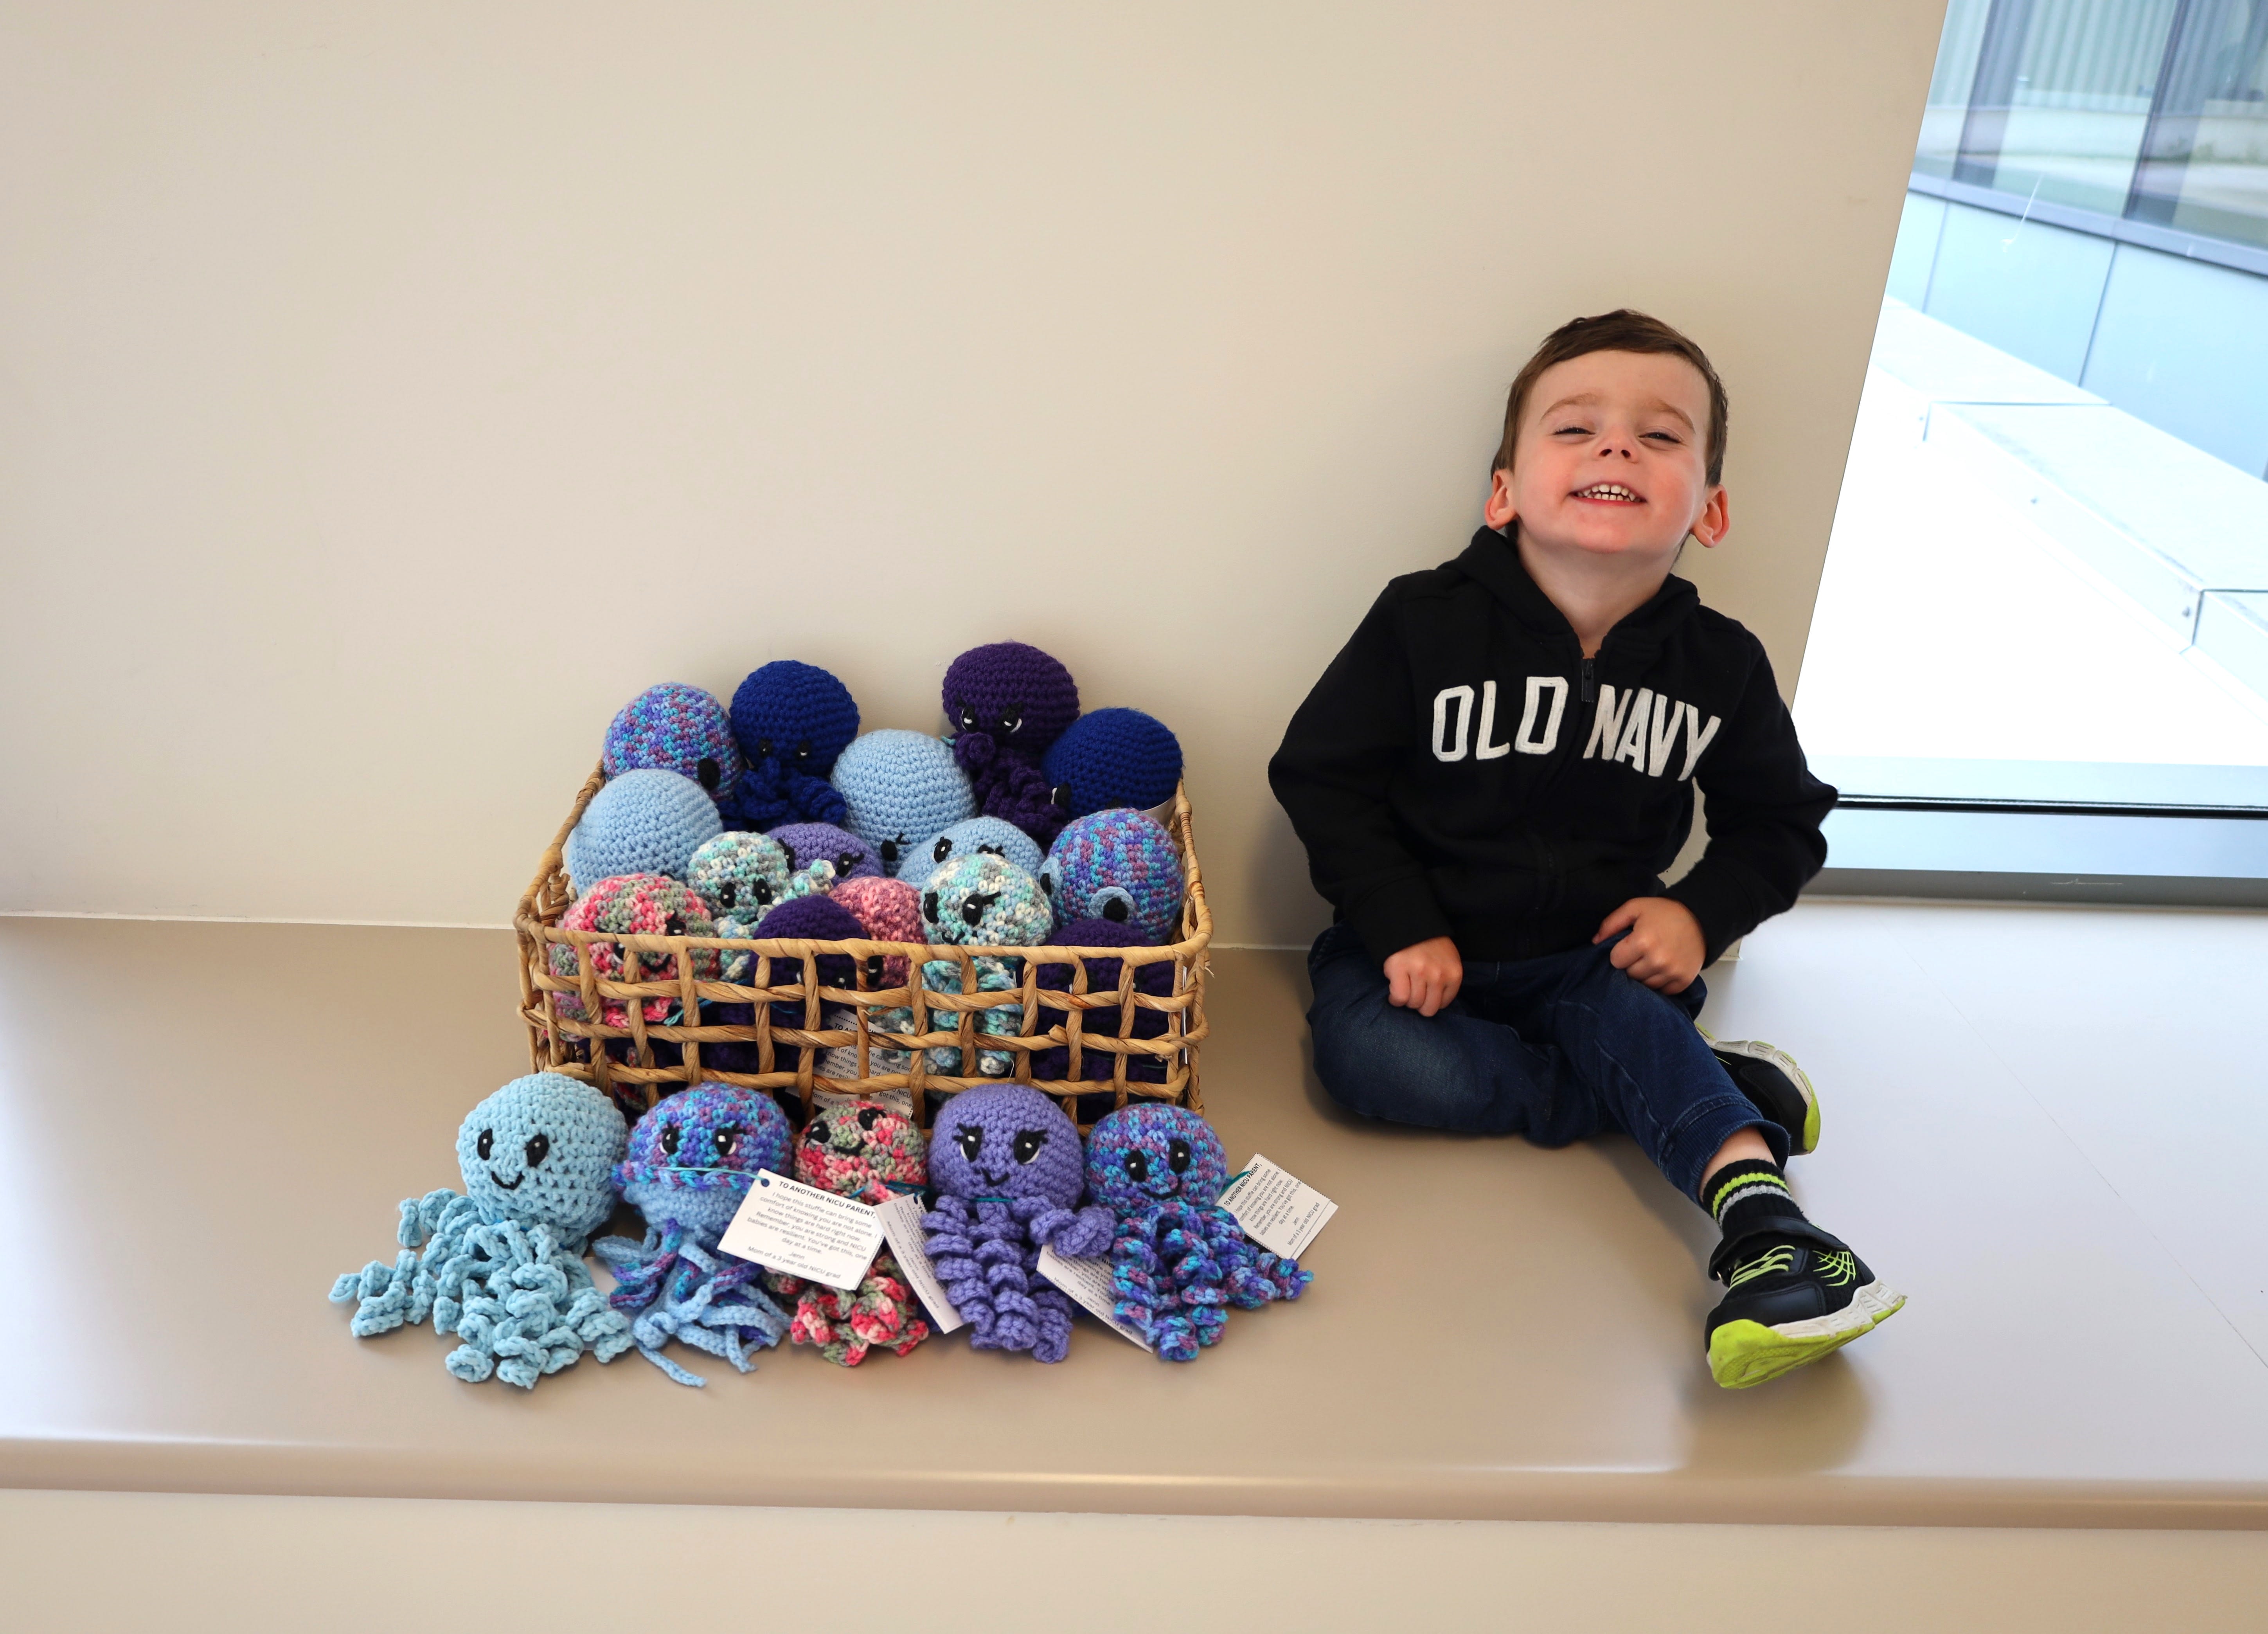 Theo Marinelli is all smiles beside the basket of toys his mom crocheted as a recent donation to Niagara Health’s NICU. Theo was born at 34 weeks and spent the first 30 days of his life in the NICU.